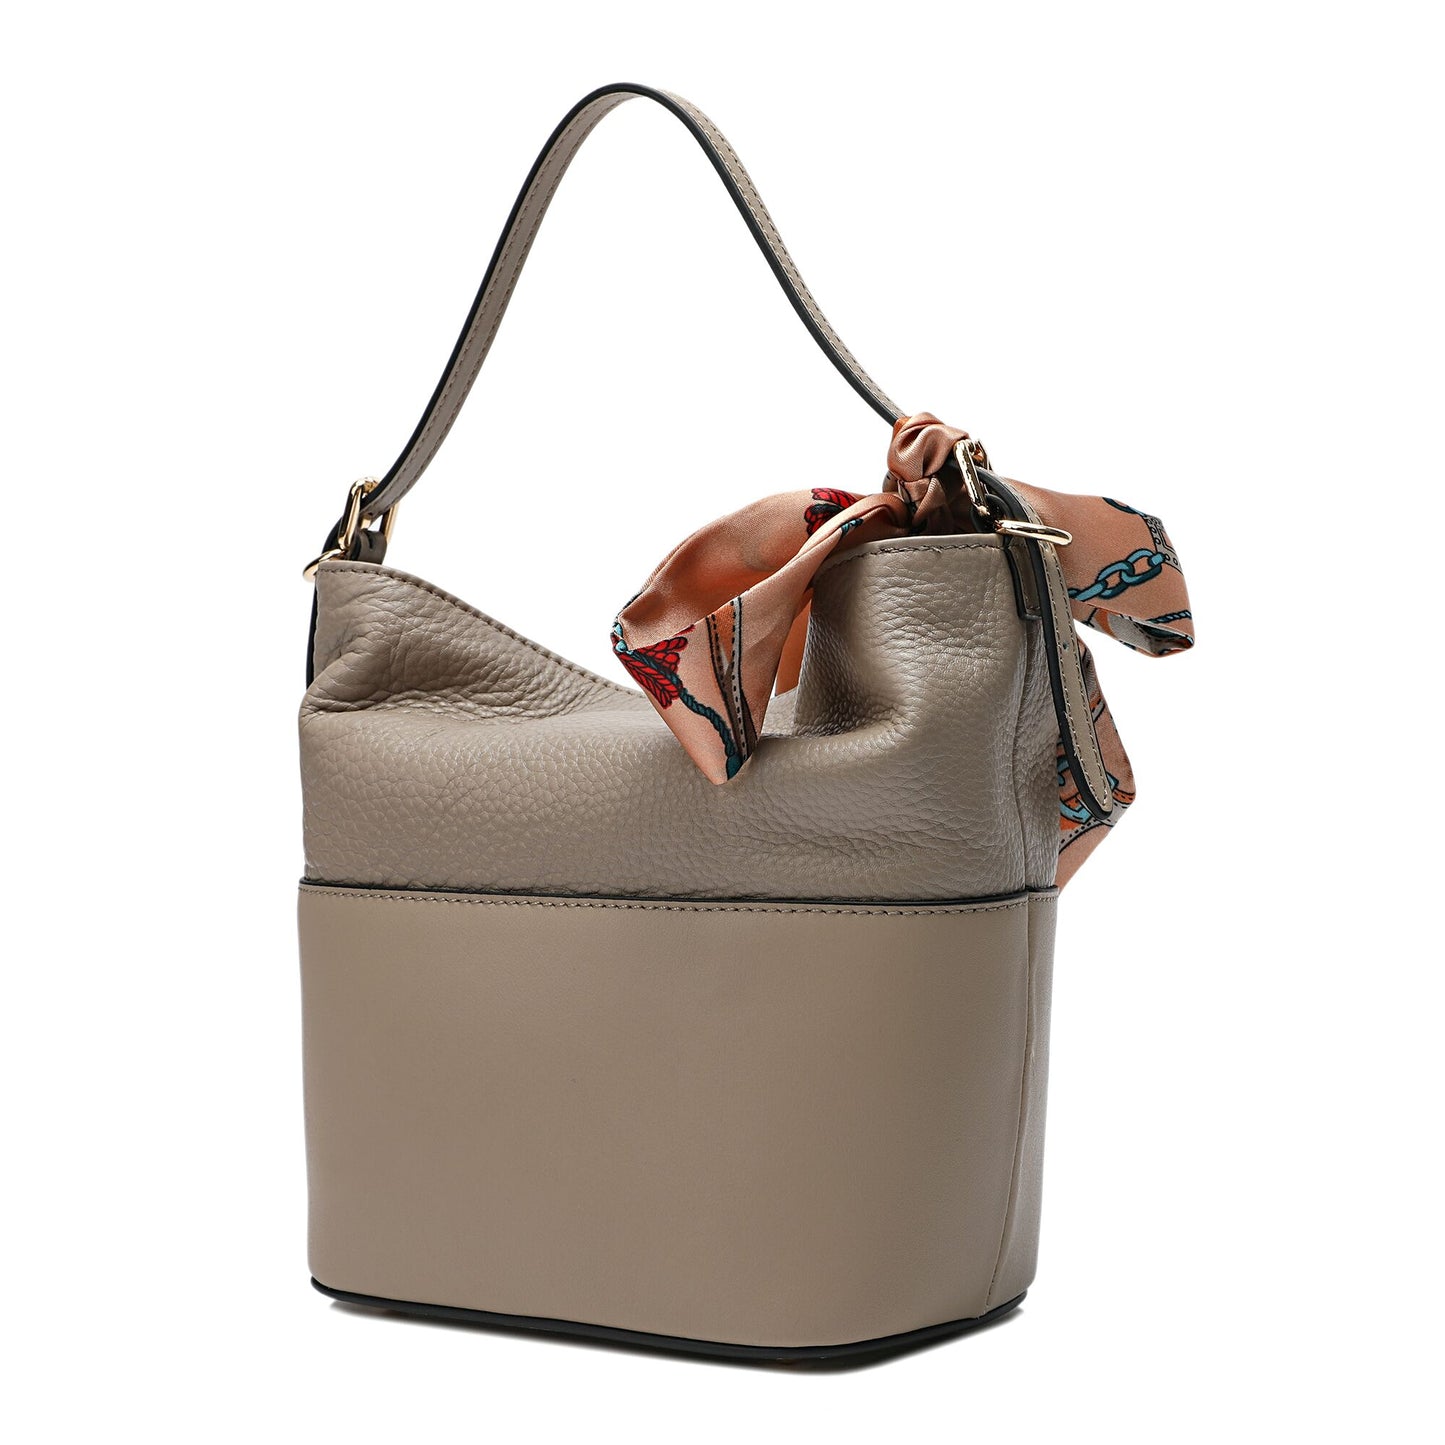 Full-grain Nappa and Grained Leather Shoulder Bag